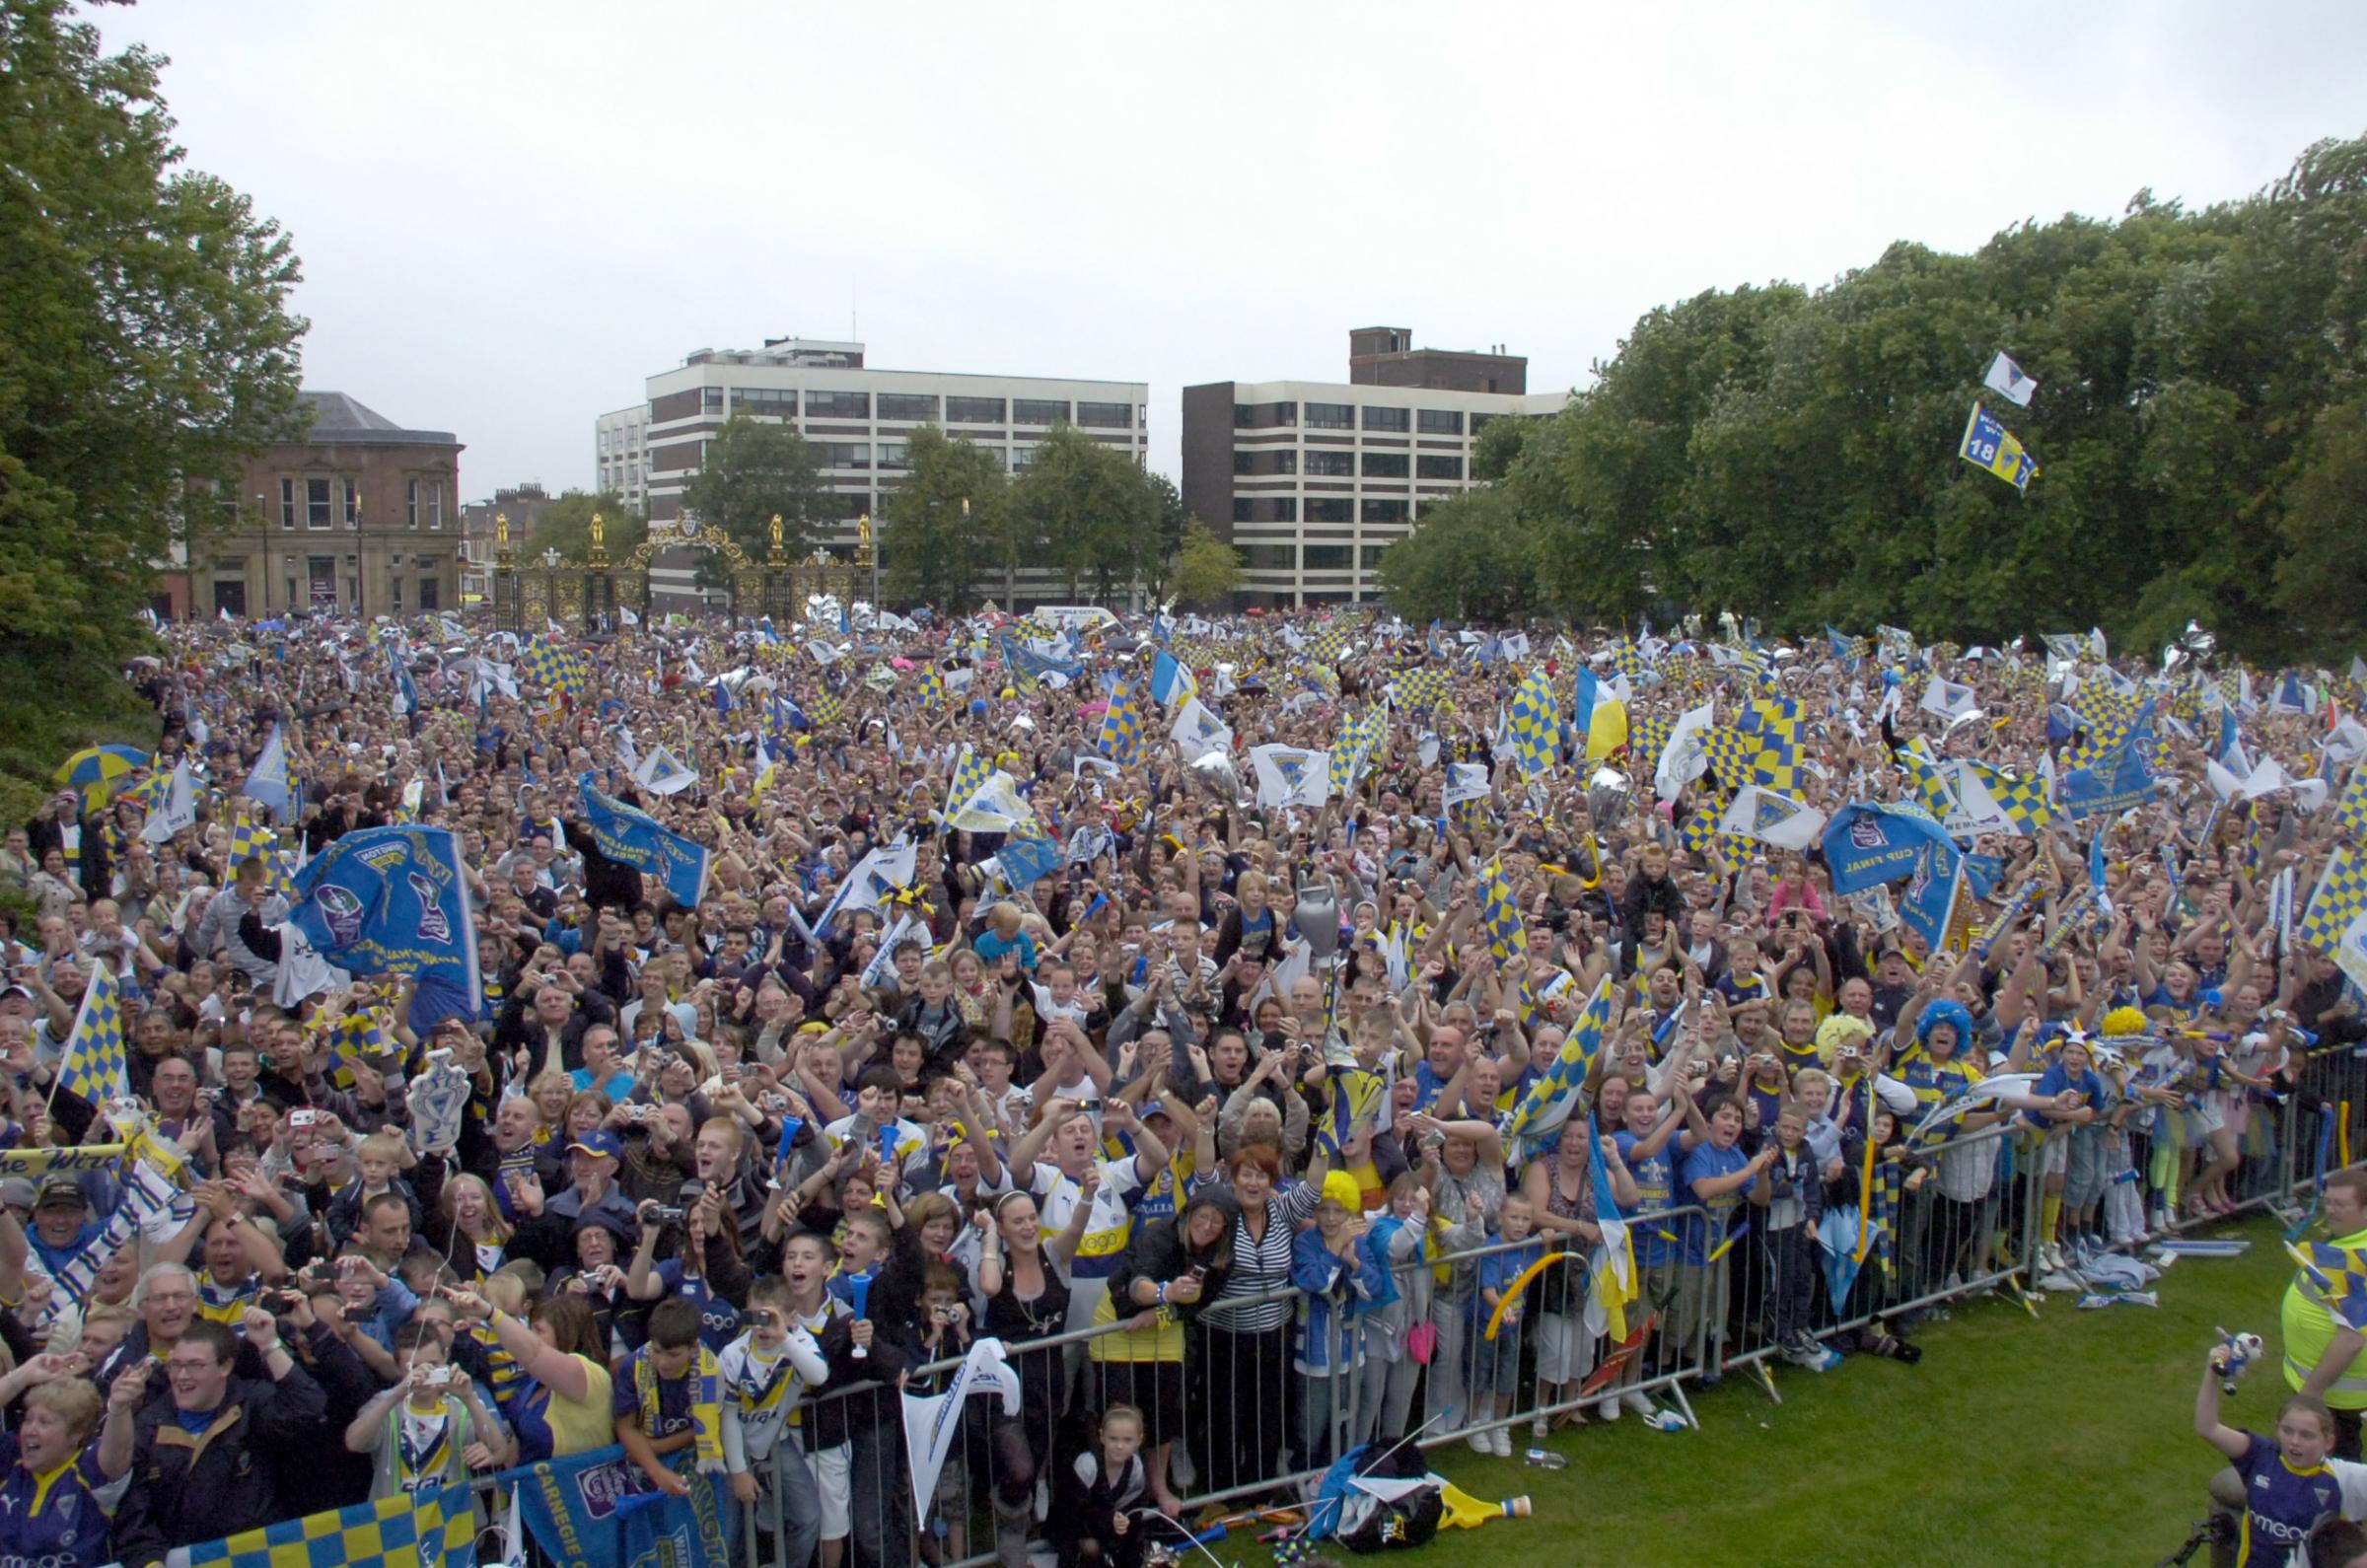 2009: Gathered at the Town Hall for the Warrington Wolves Challenge Cup homecoming